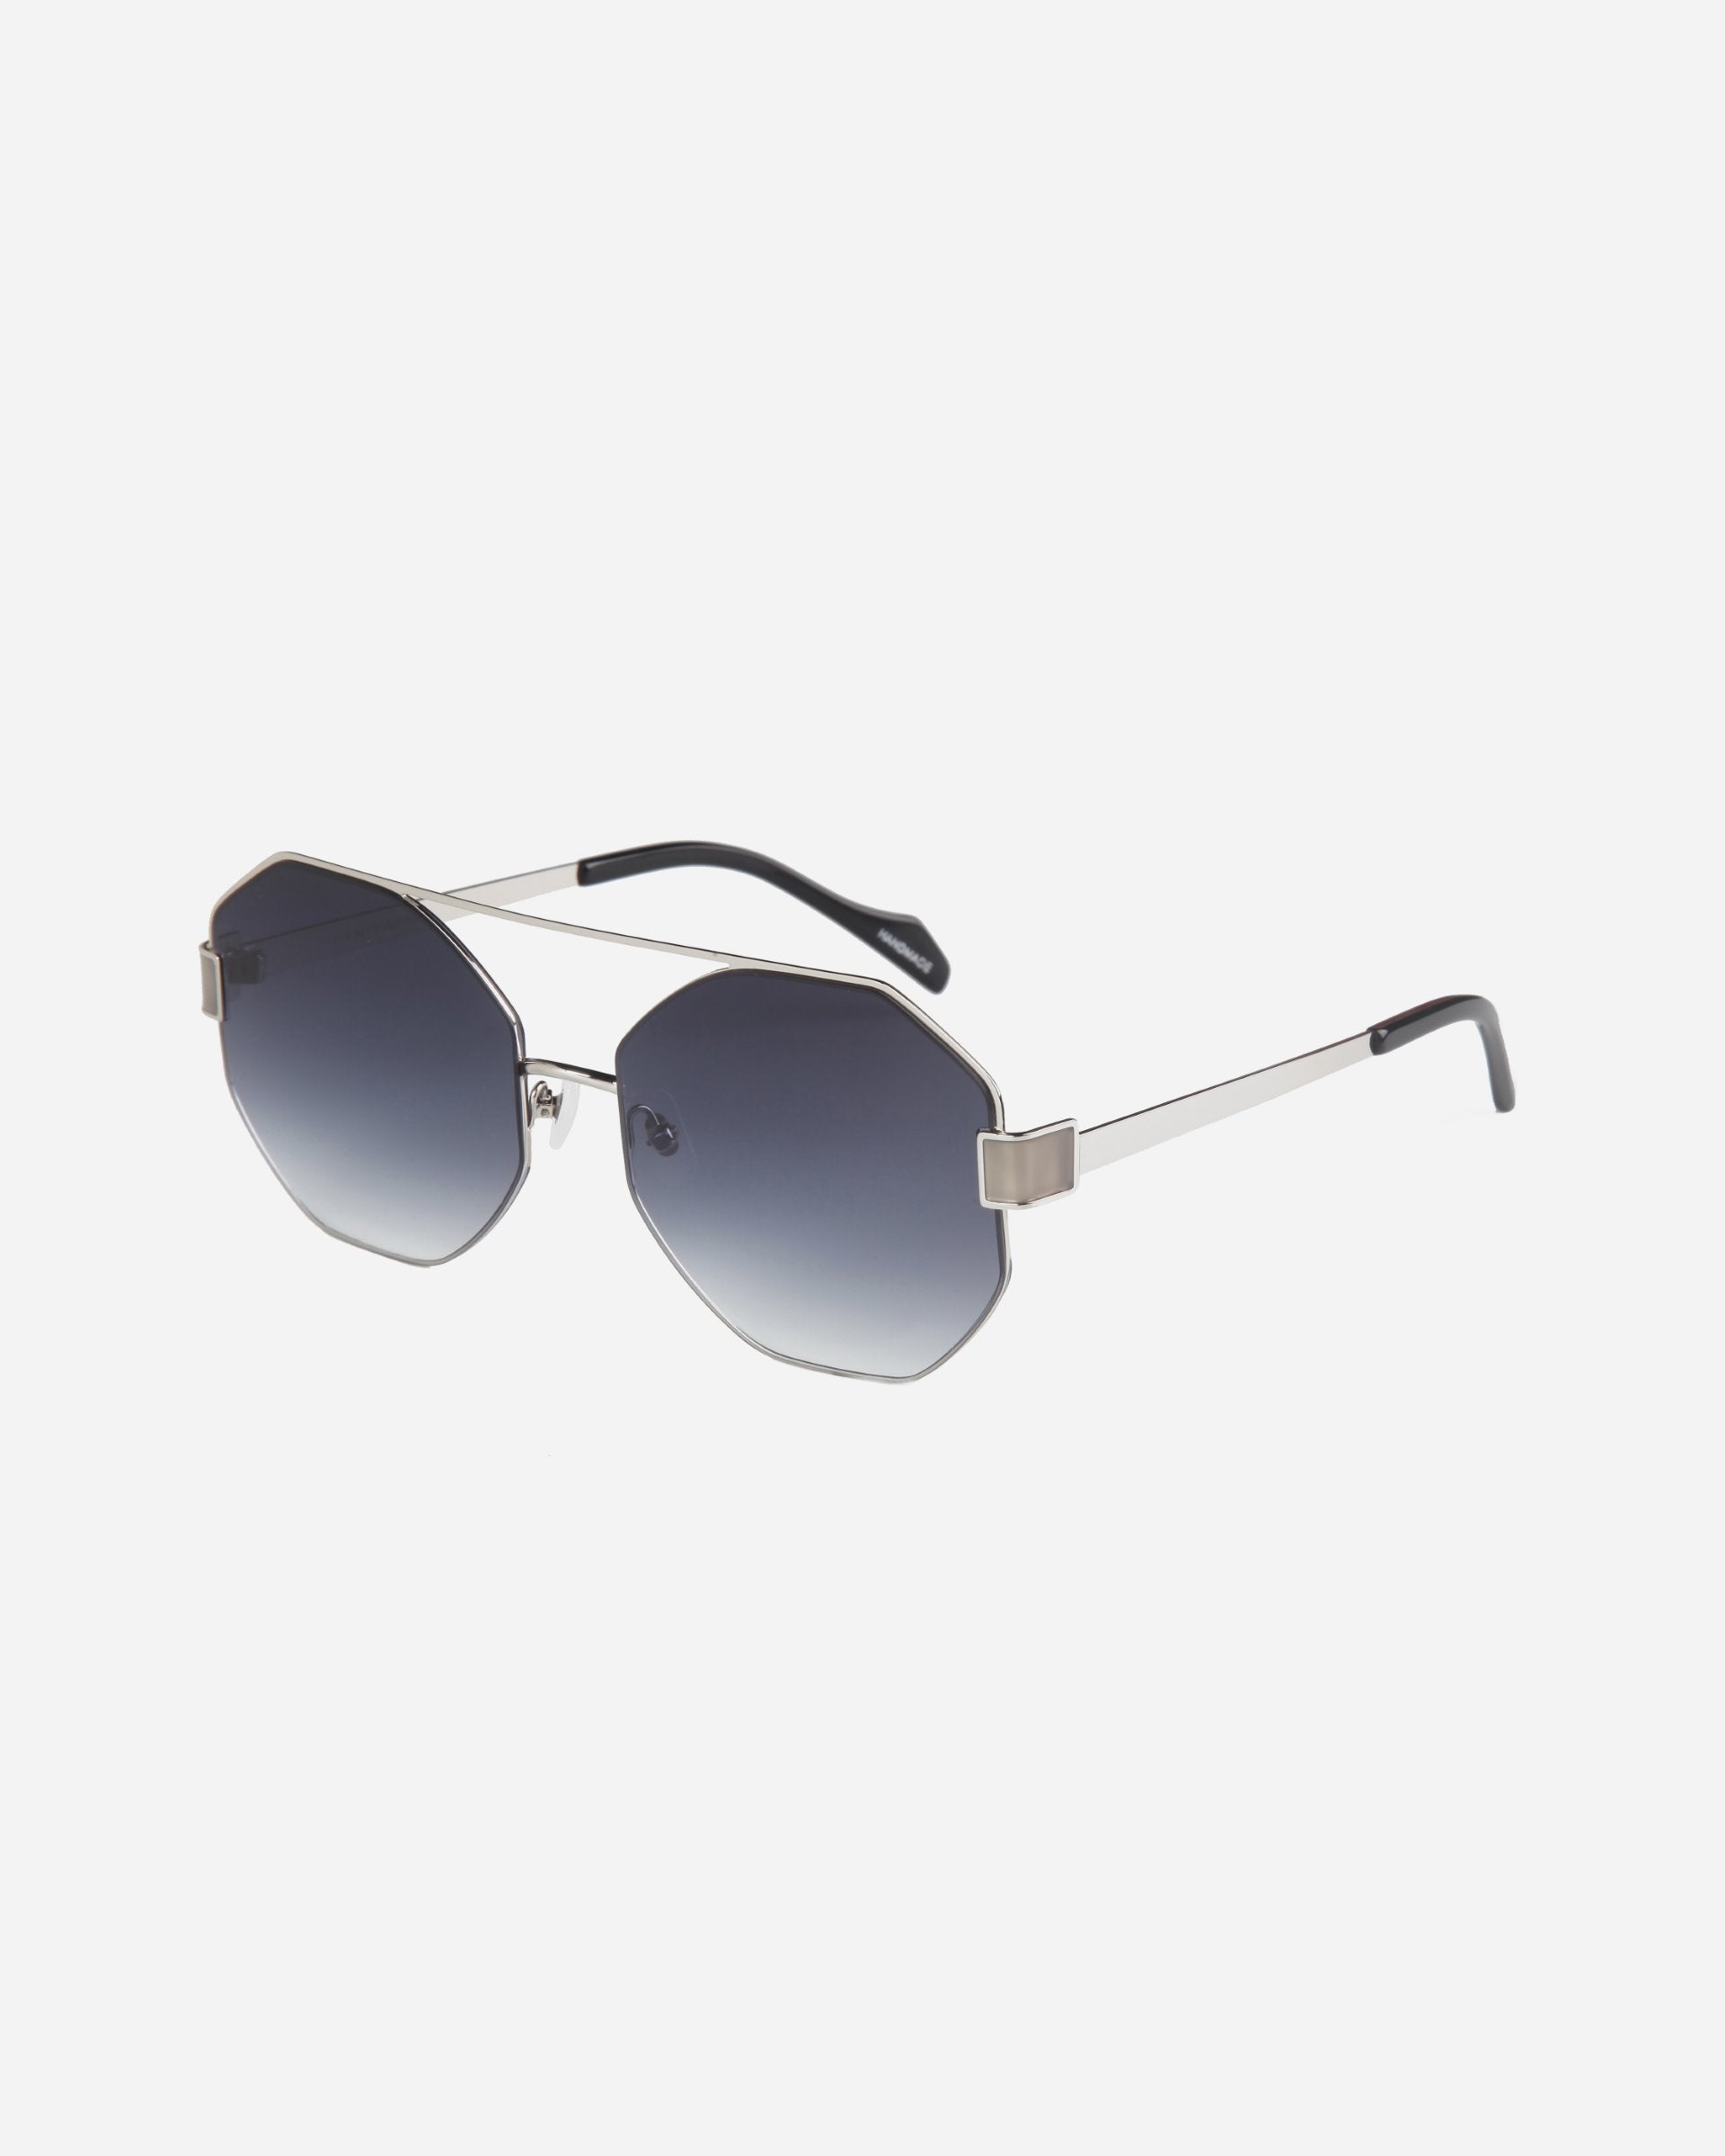 A pair of stylish For Art's Sake® Mania sunglasses with octagonal nylon lenses featuring a gradient tint from dark at the top to lighter at the bottom. The stainless steel frame boasts a sleek, minimalist design, and the temples are thin with black tips. Adjustable nosepads ensure a comfortable fit for all-day wear.